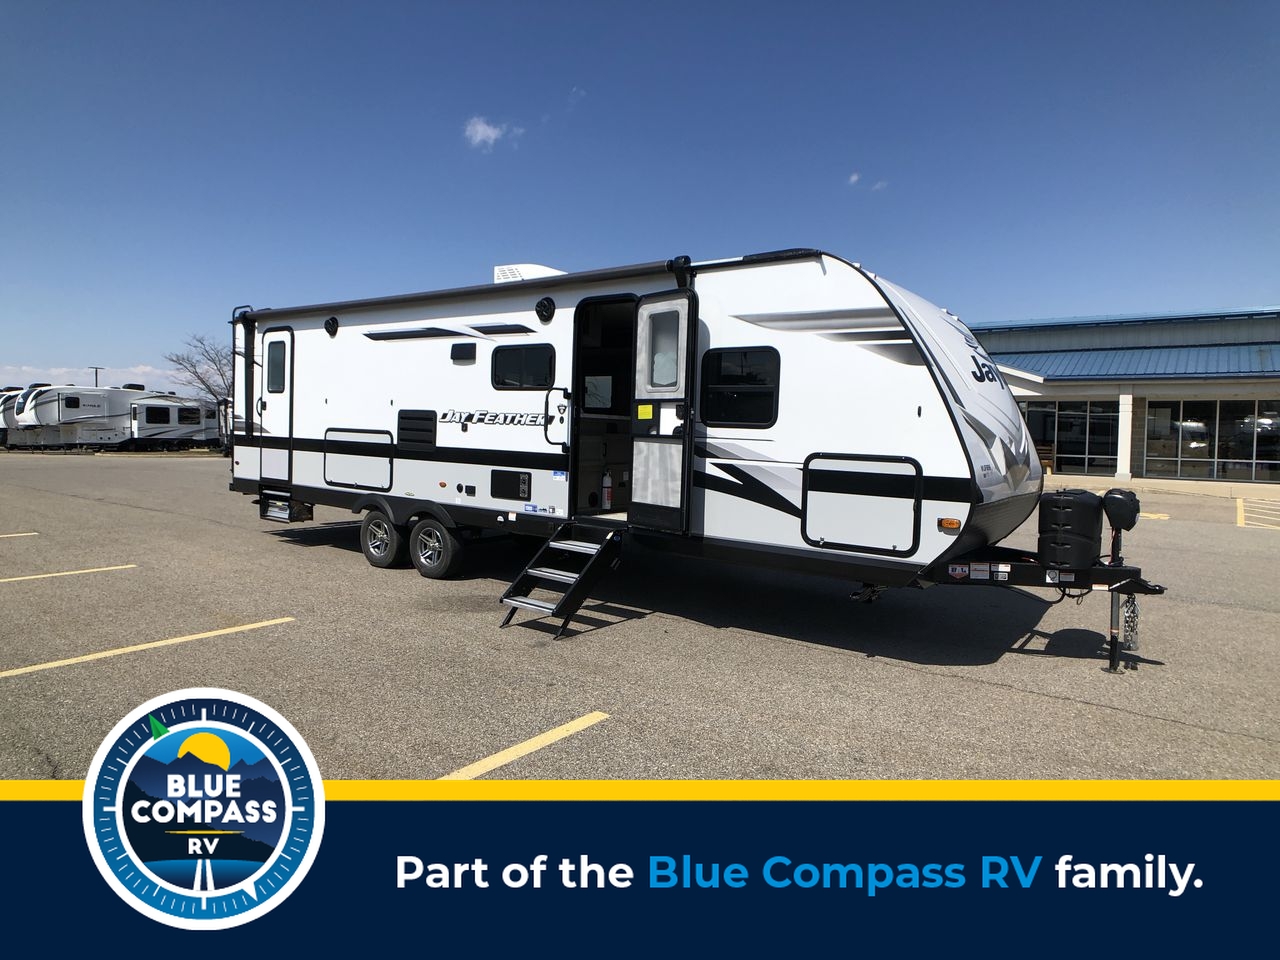 New 2024 Jayco Jay Feather 27BHB Travel Trailer at Blue Compass RV | Columbia City, IN [Video]